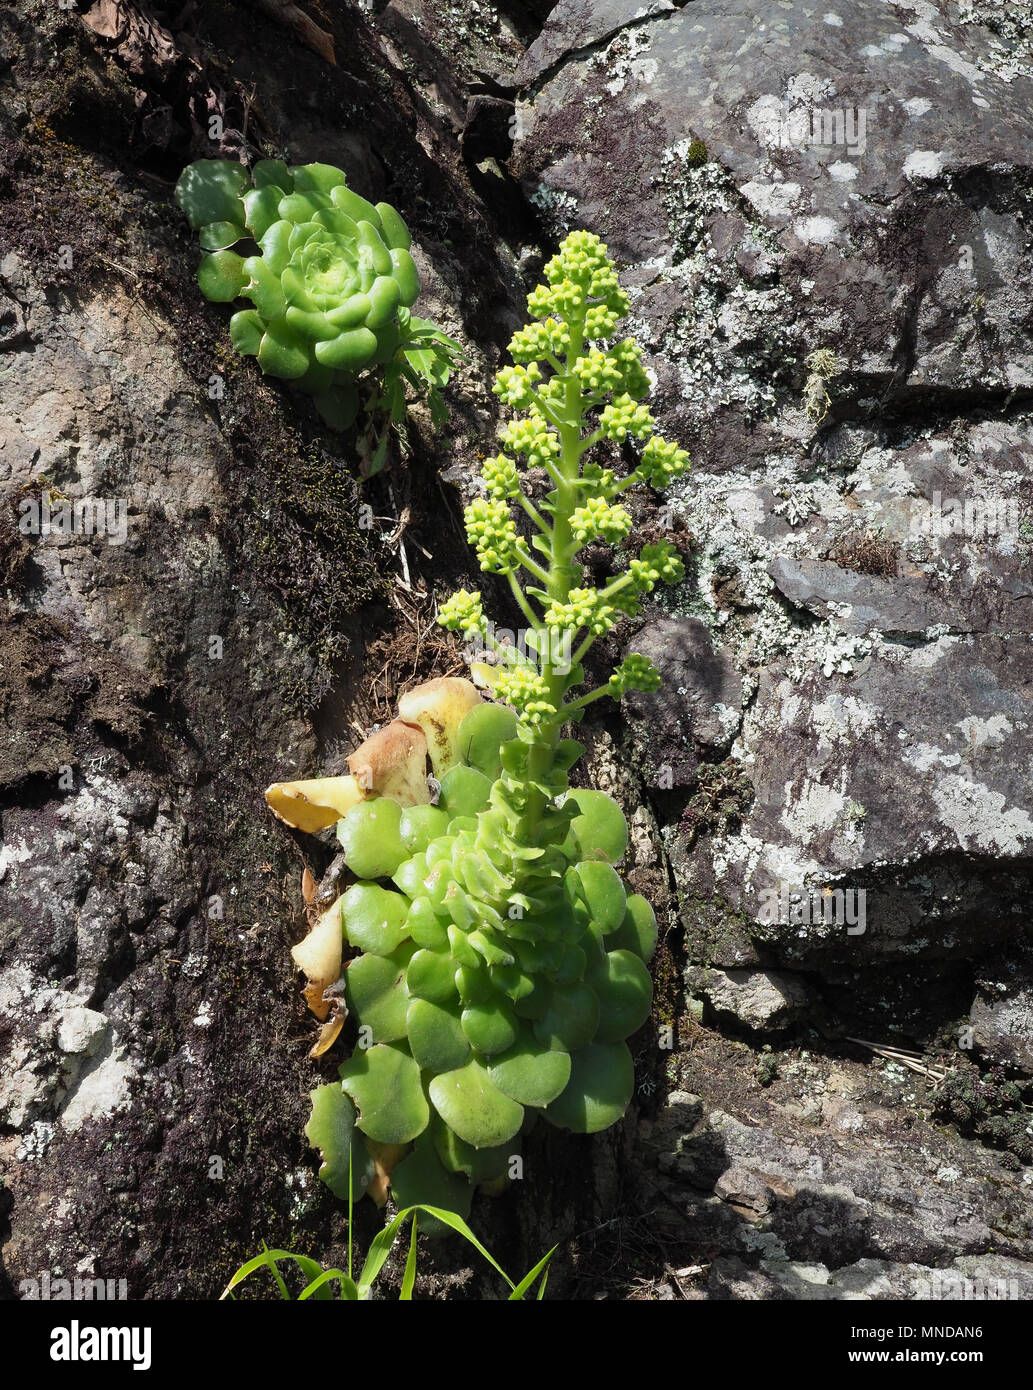 Newly formed flower spike Aeonium canariense or Tree Houseleek species with large flat leaf rosettes growing on La Gomera Canary Islands Stock Photo